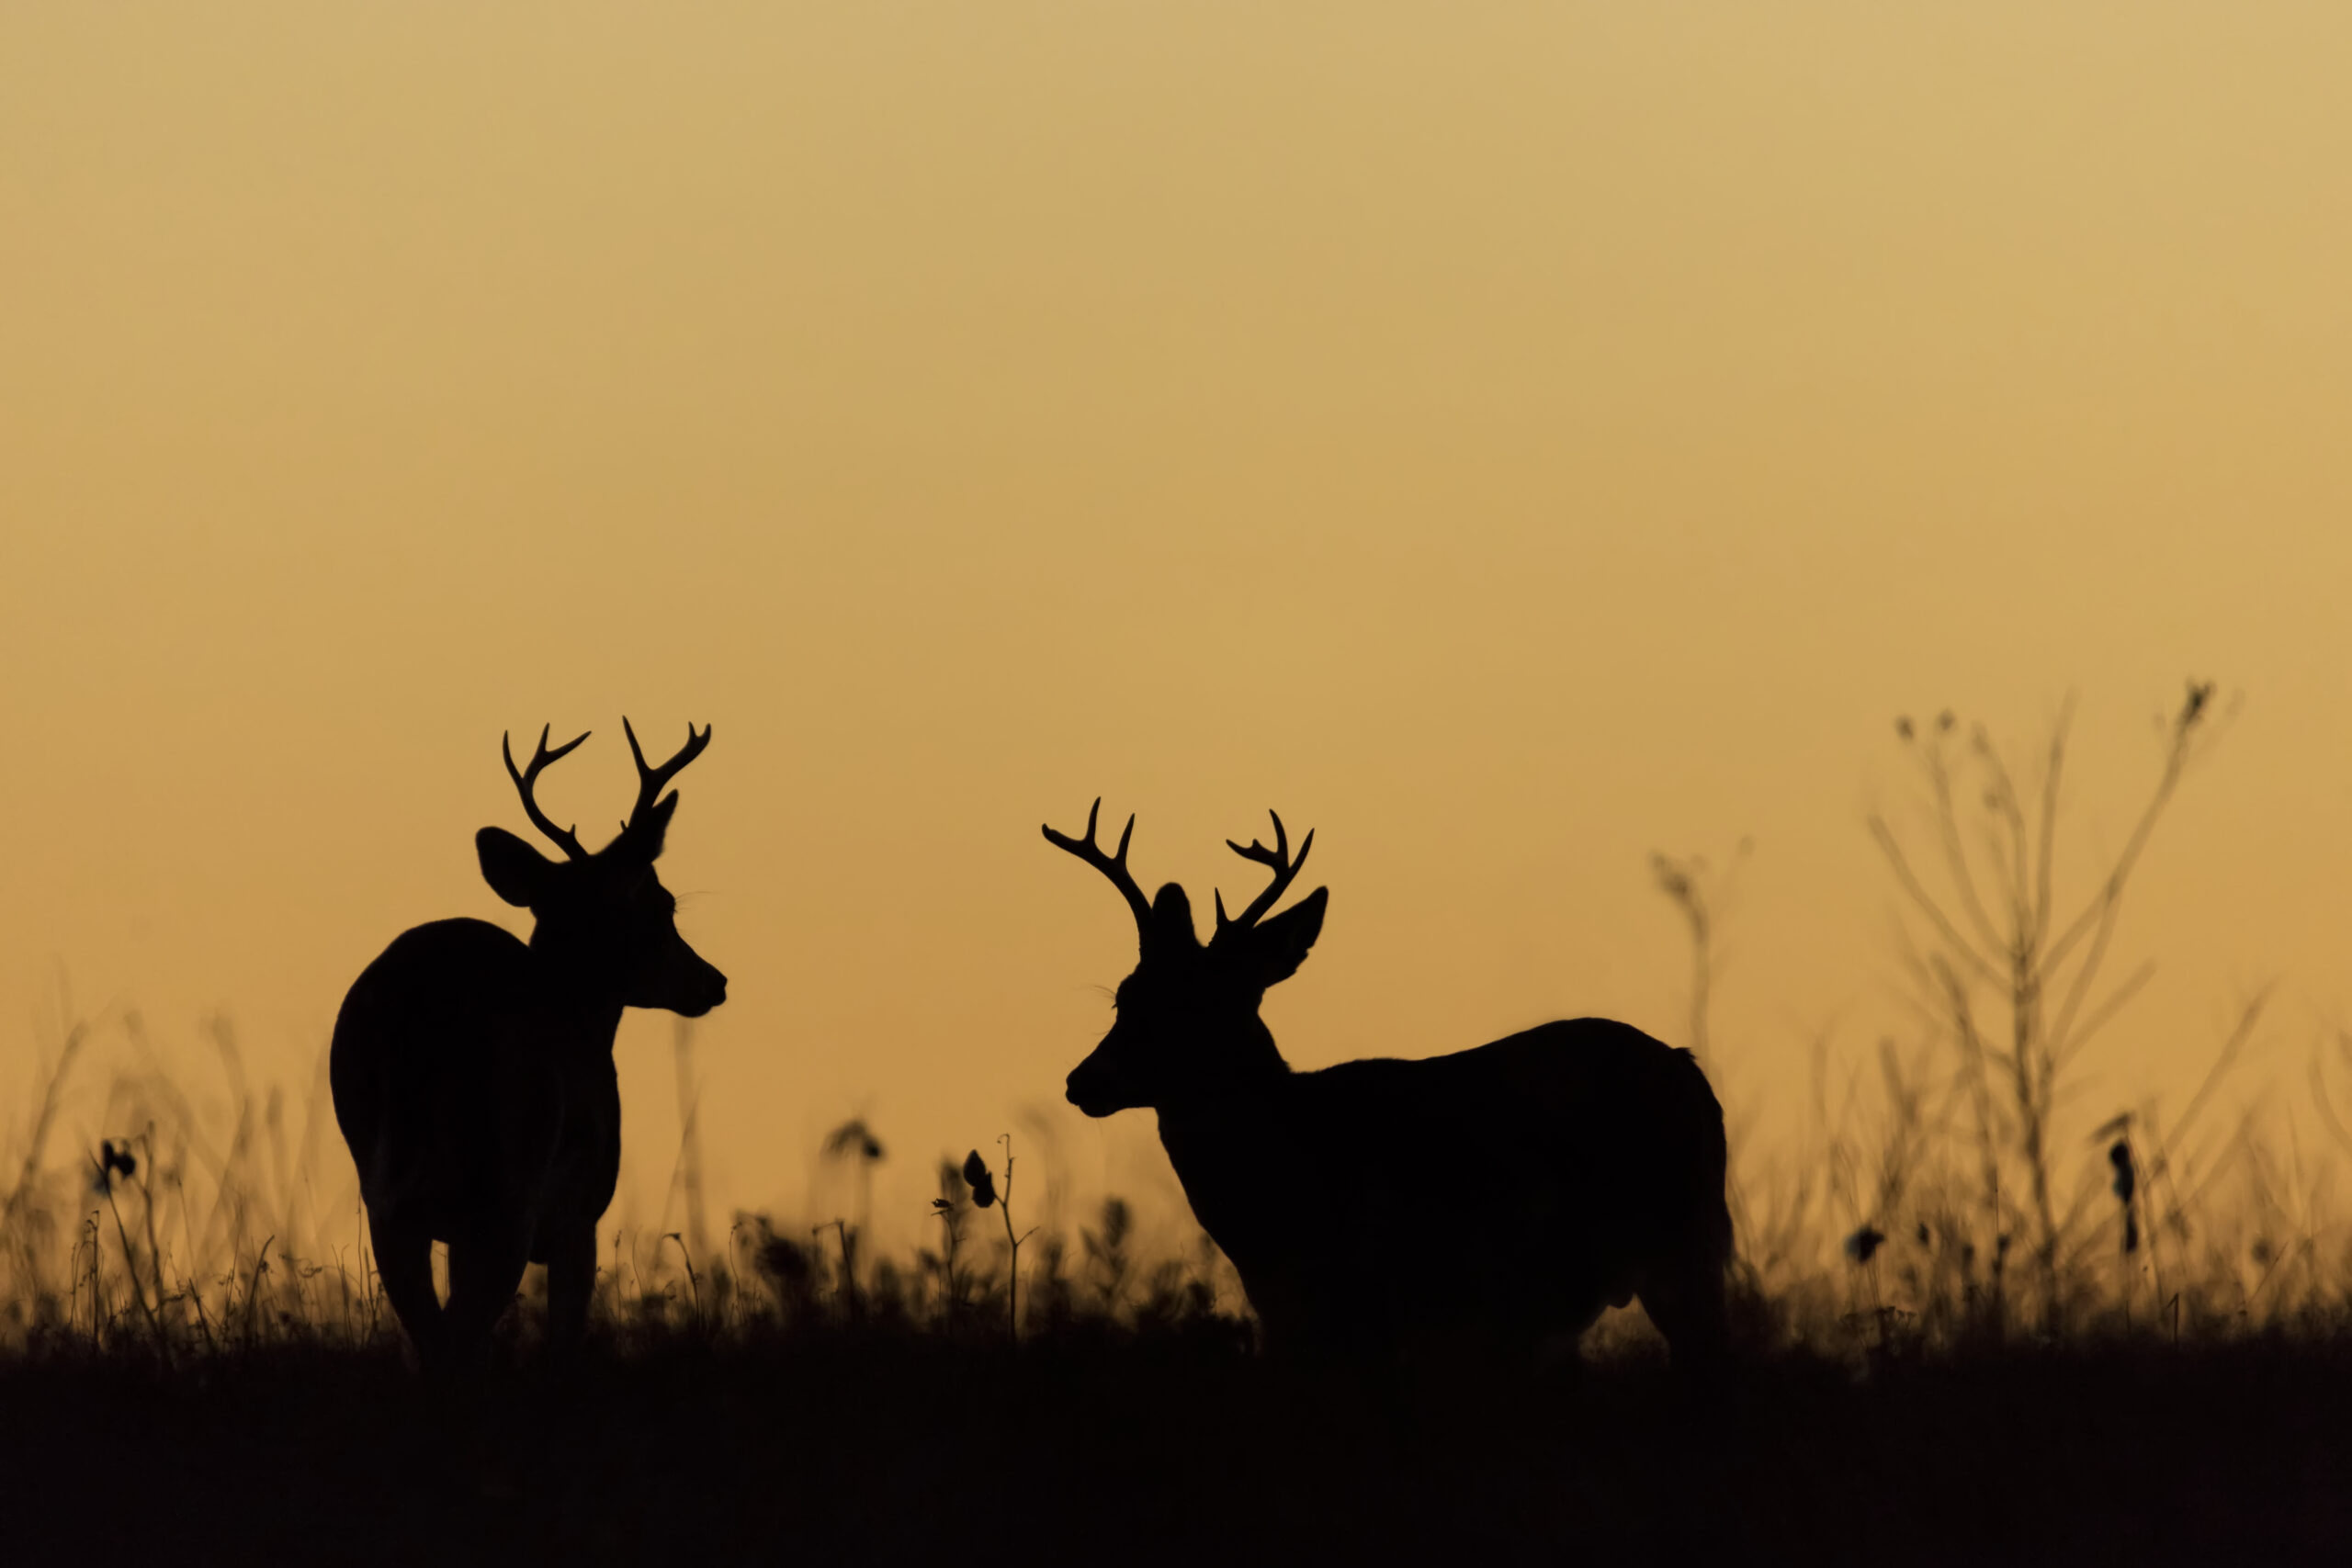 New York's current hunting laws prevents deer hunting after sunset.